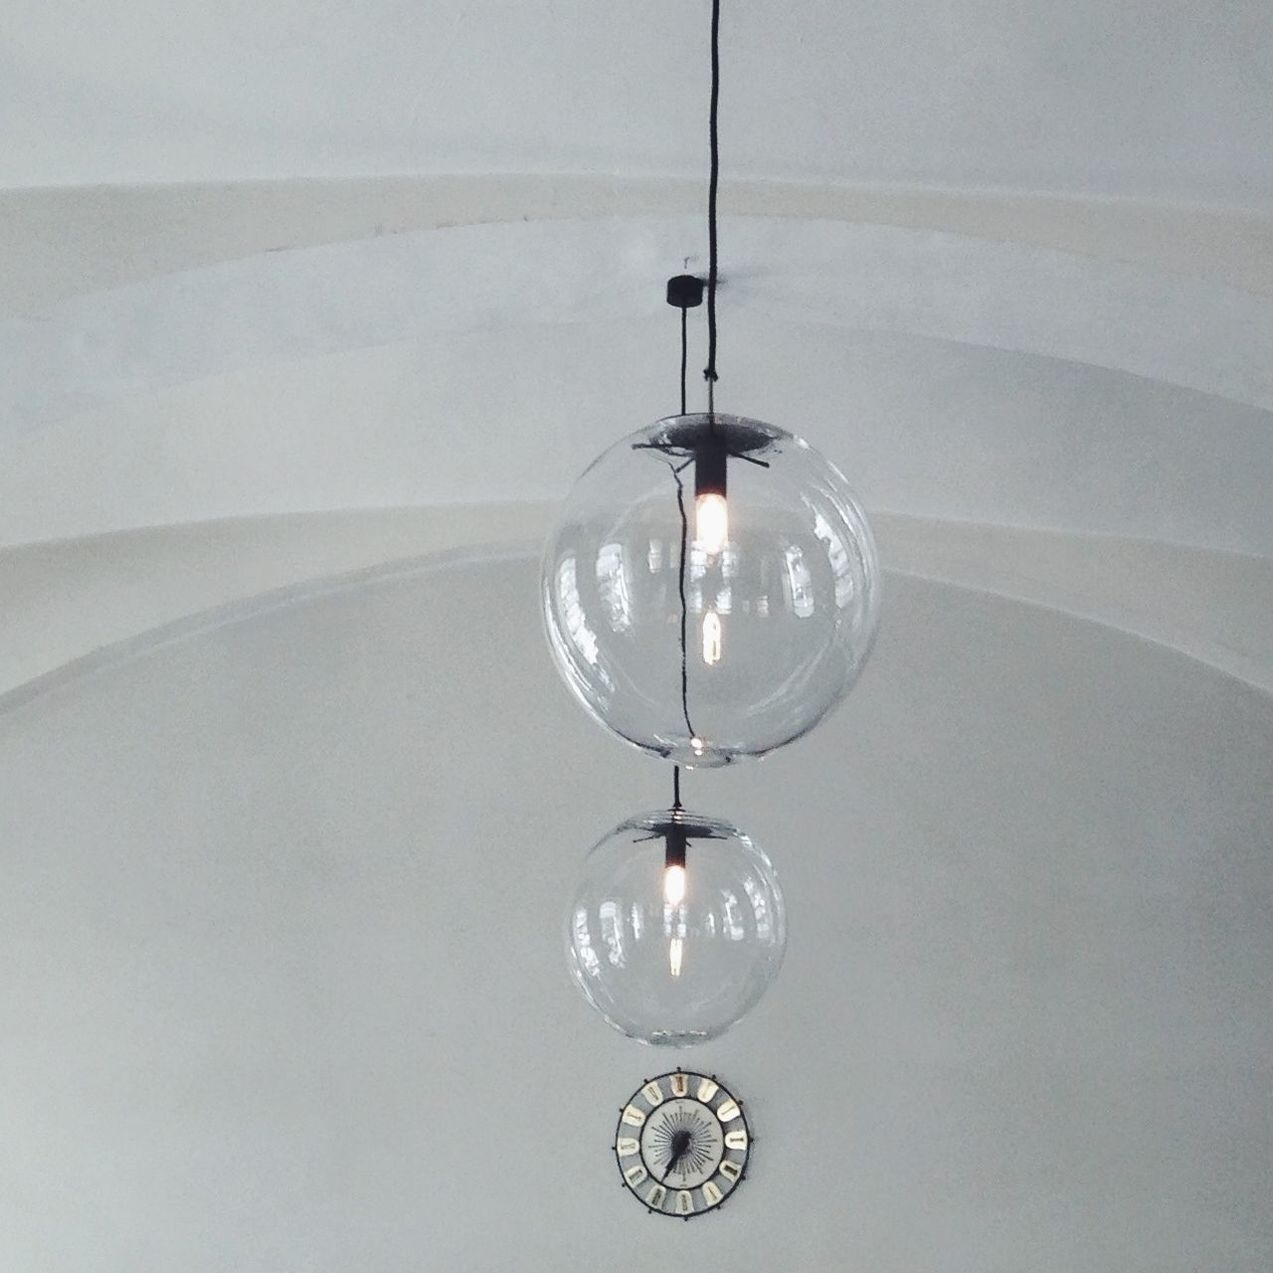 Electric lights hanging from ceiling